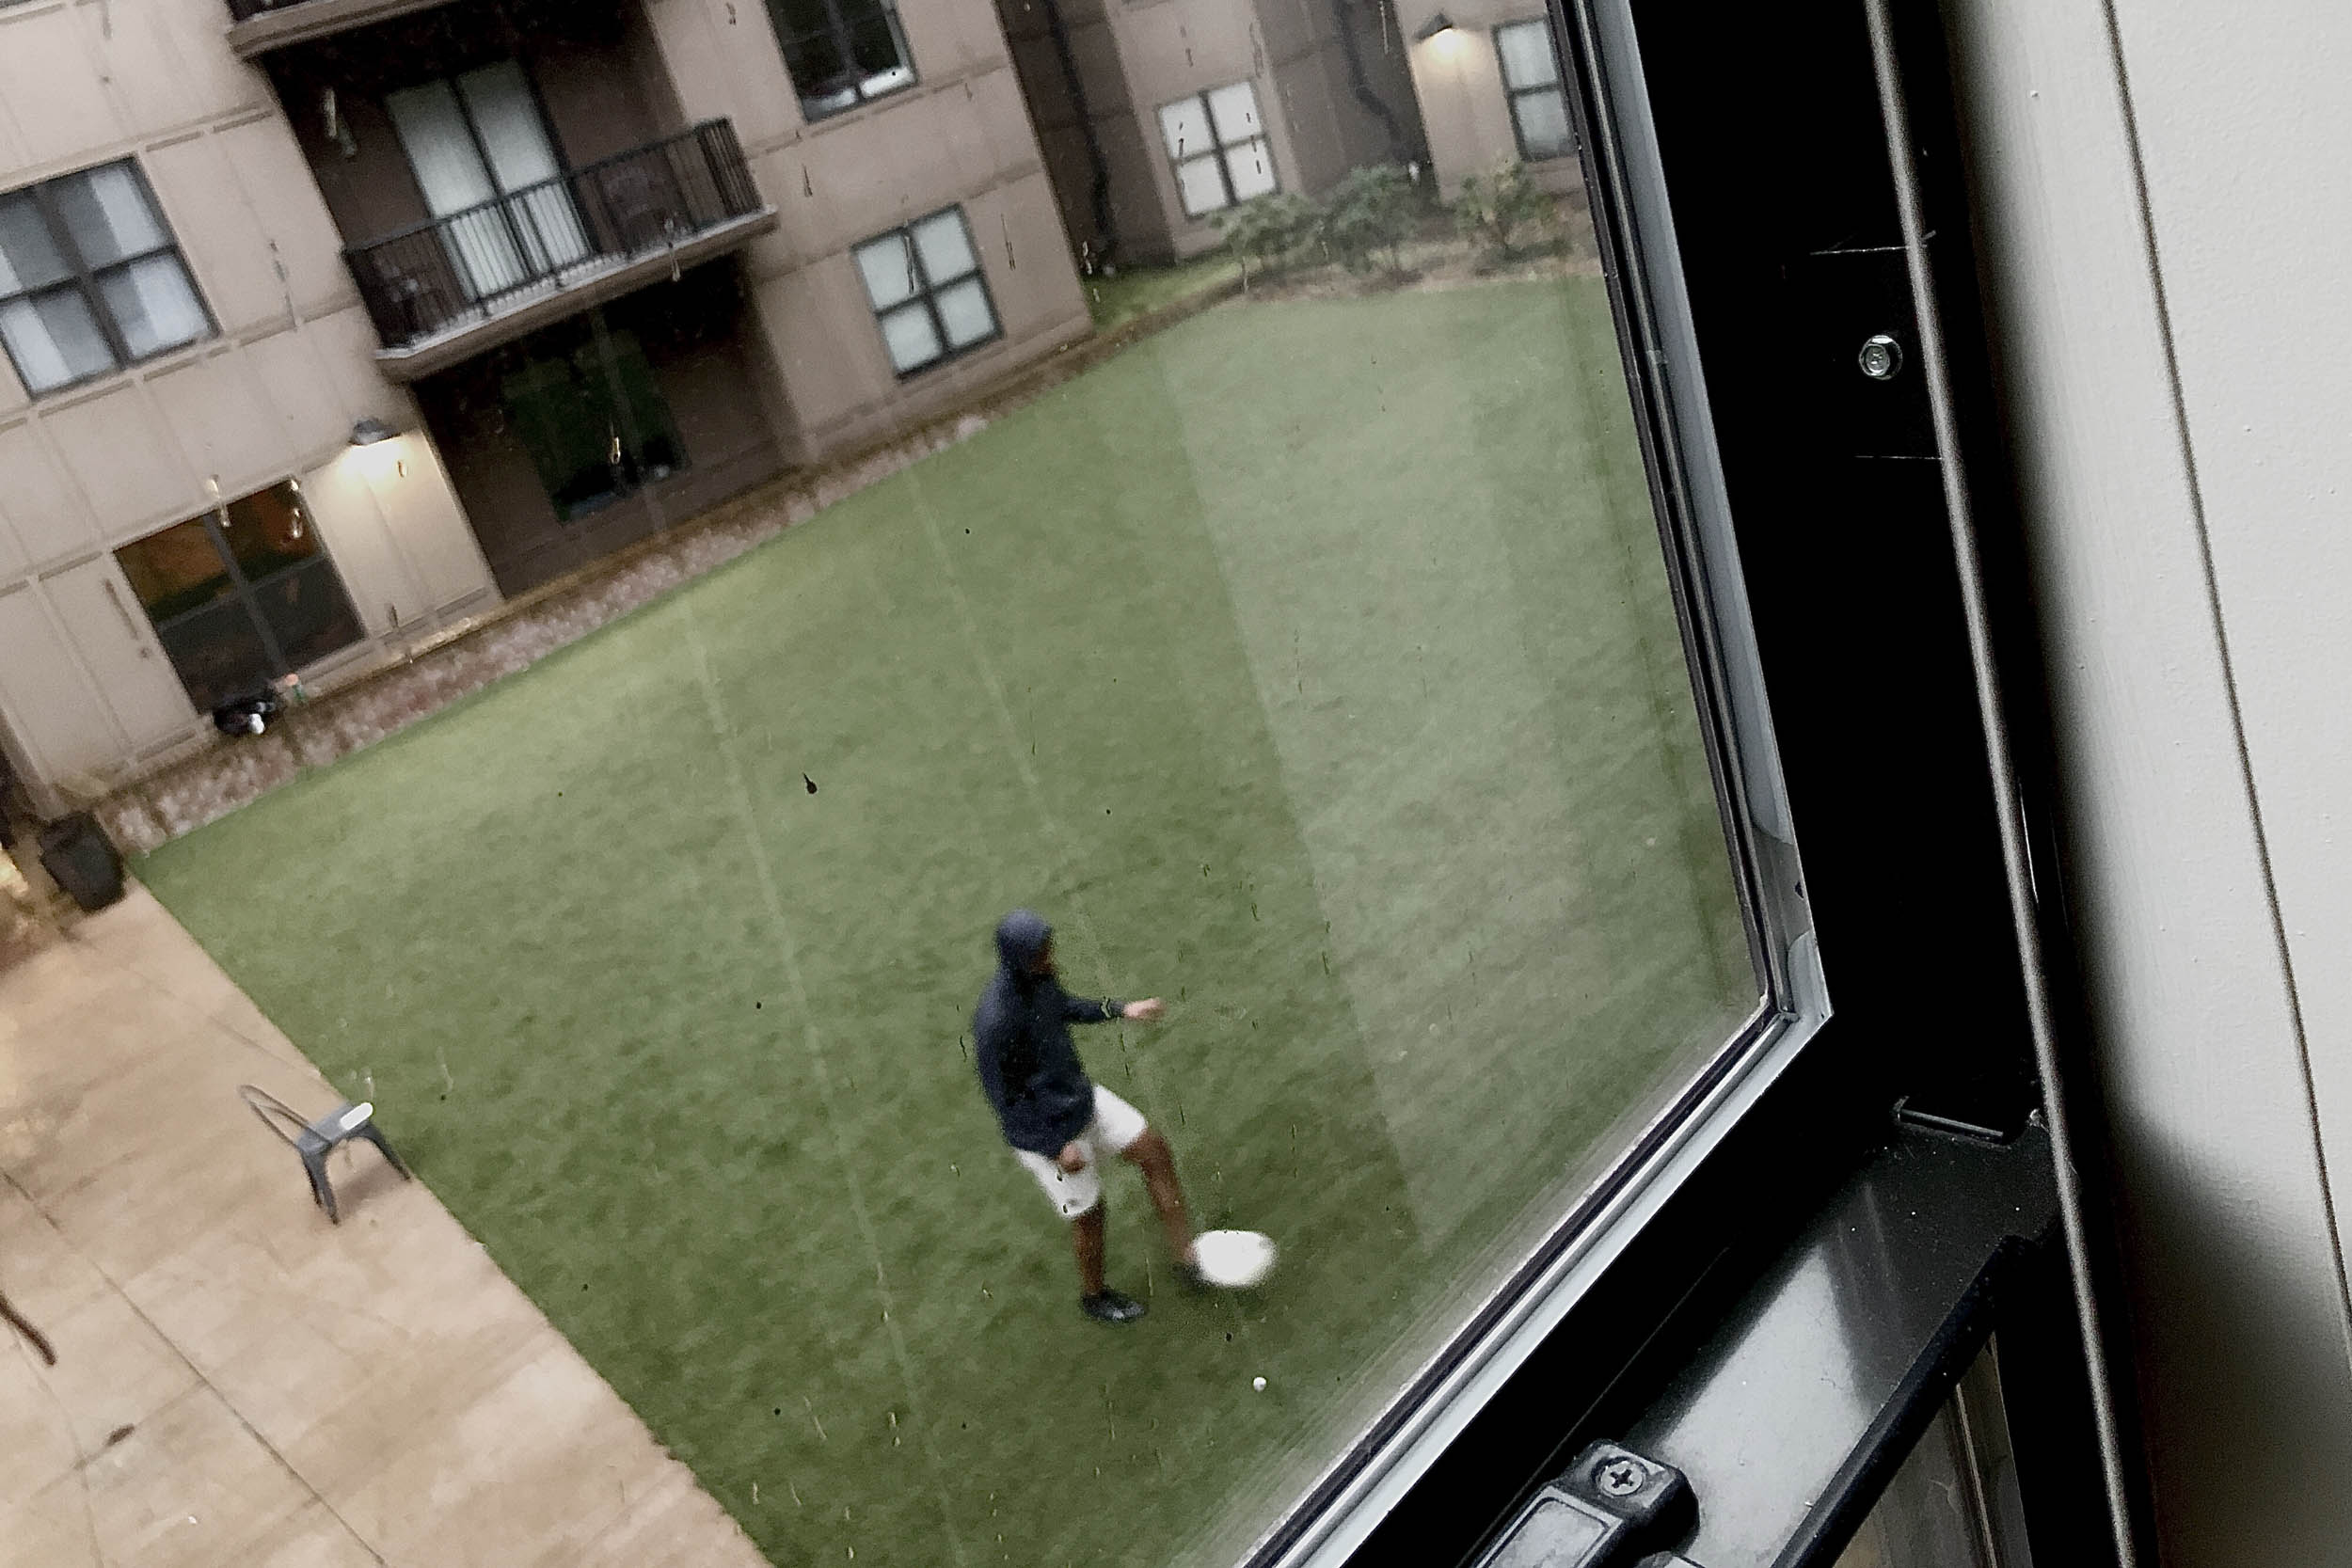 Looking out of a window to a man below playing soccer